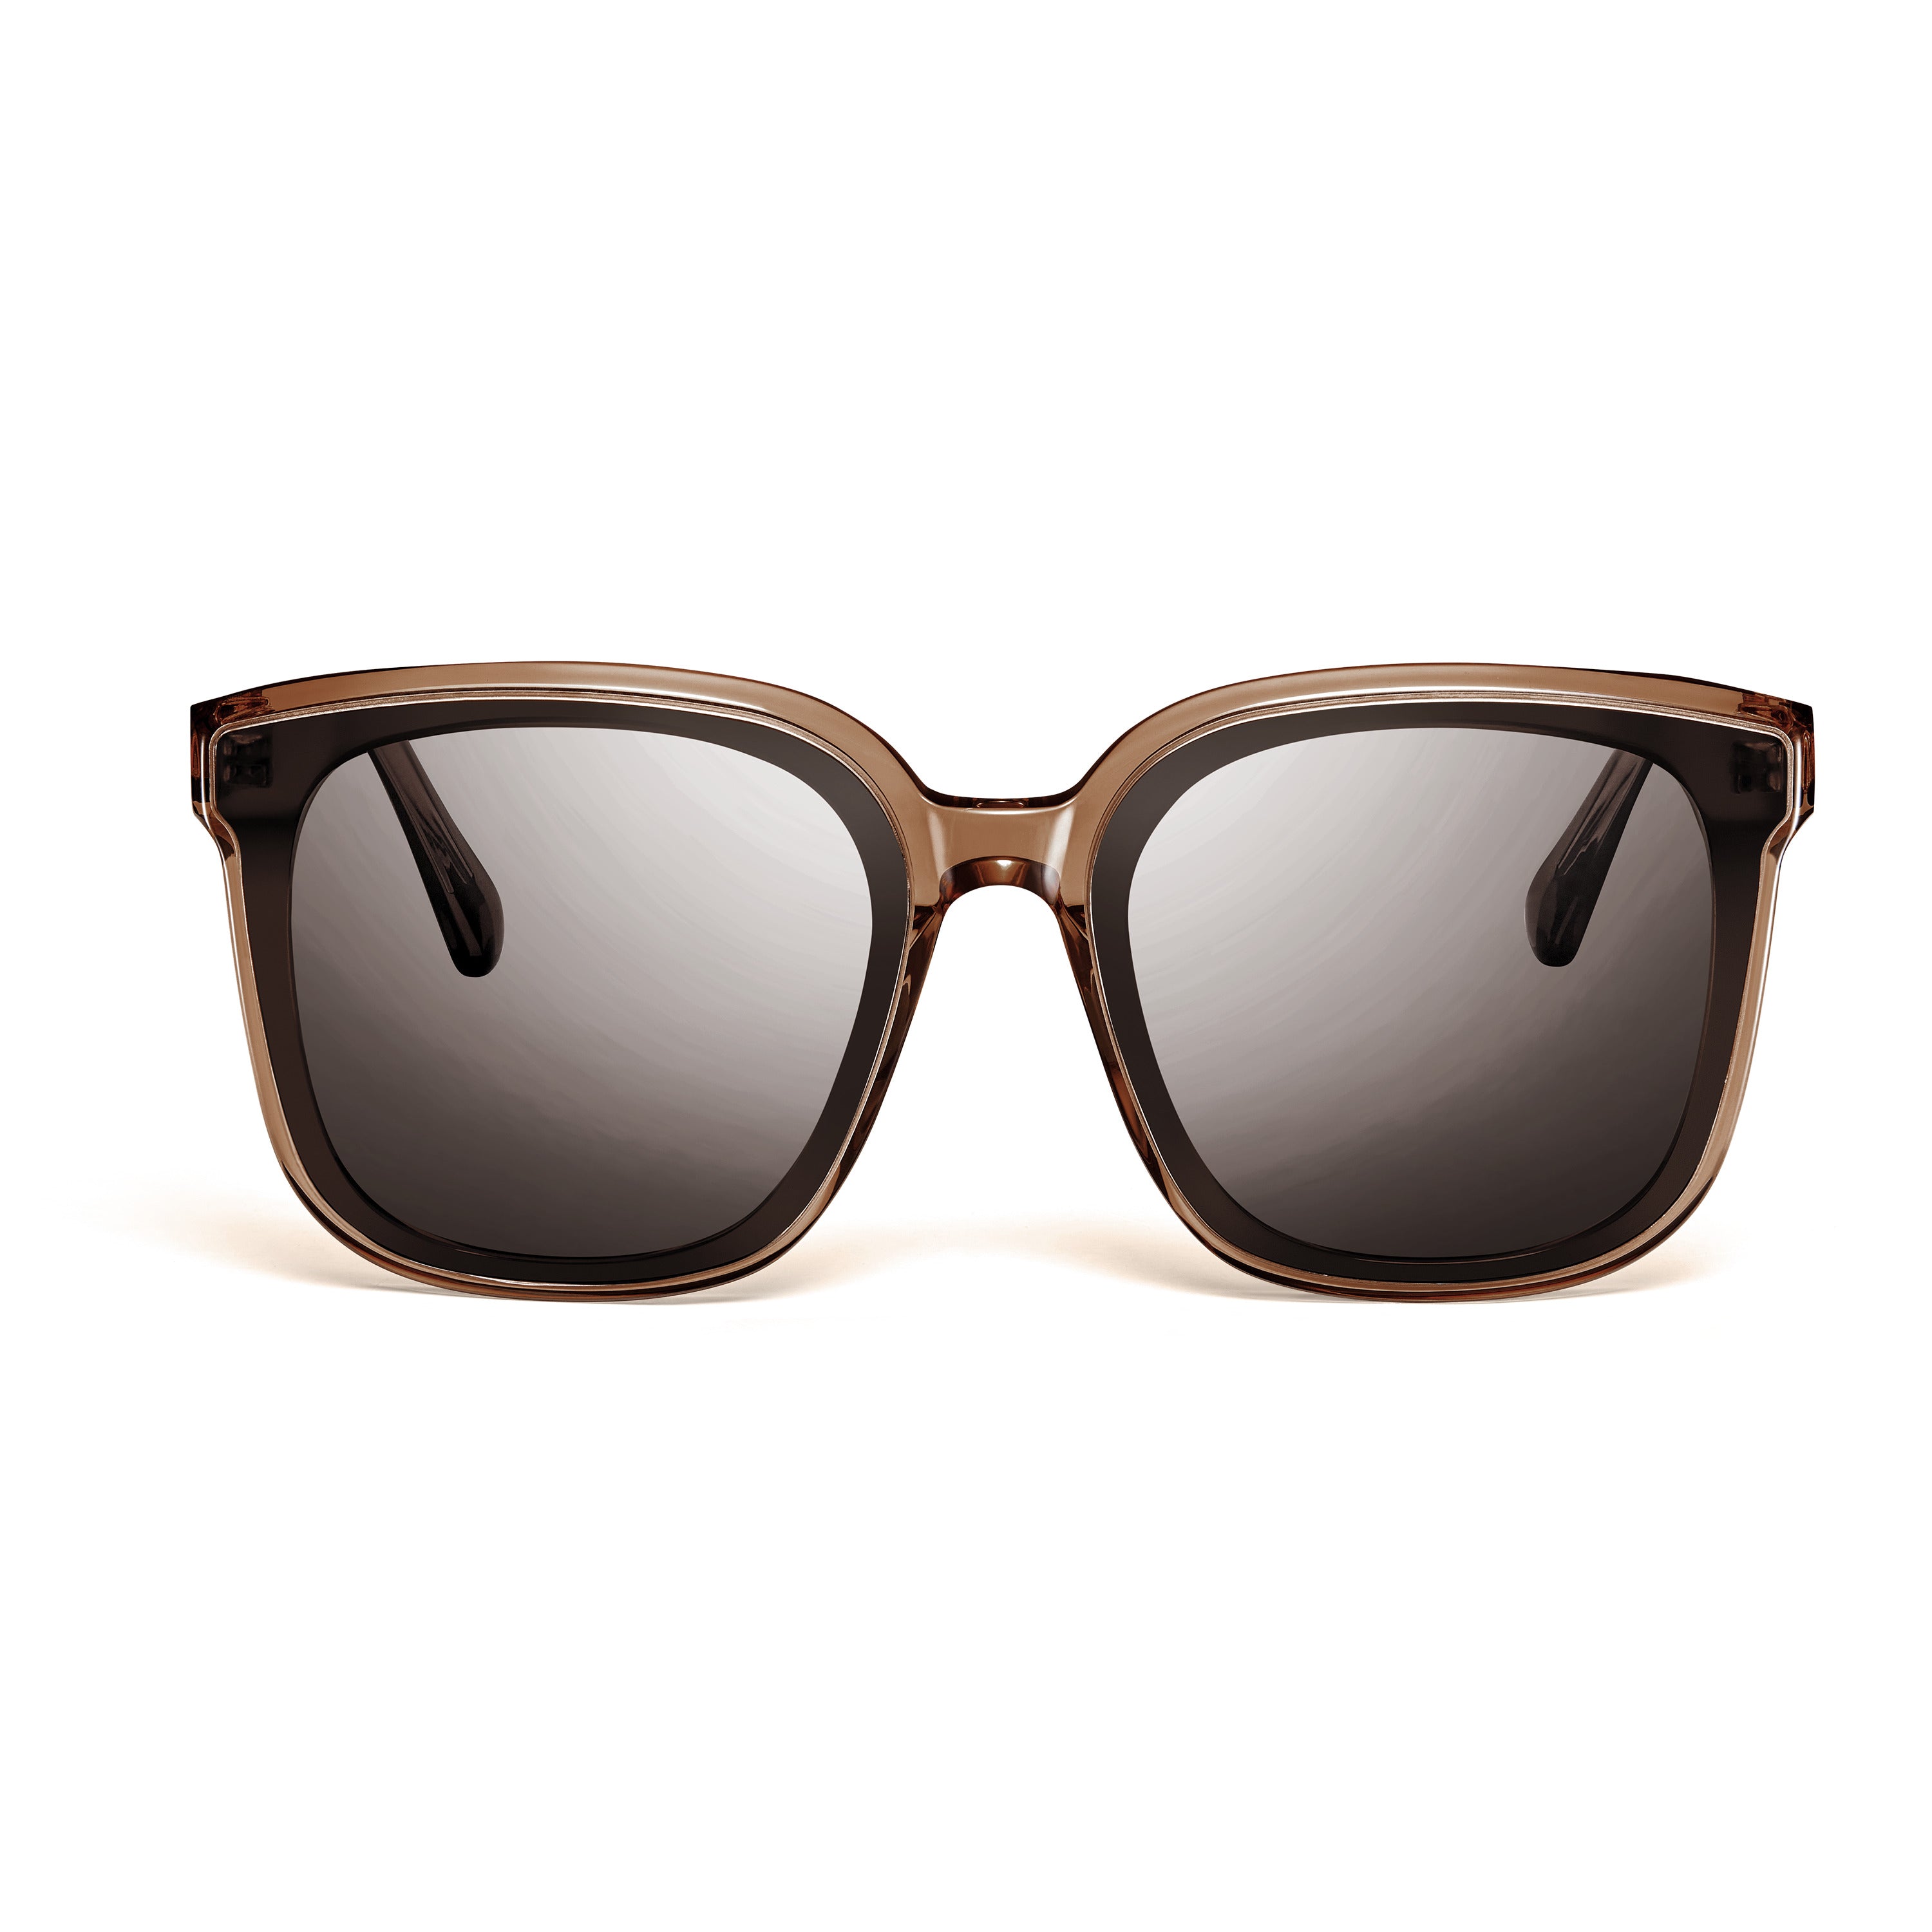 BROWN CLASSIC SUNGLASSES - 4B Watches